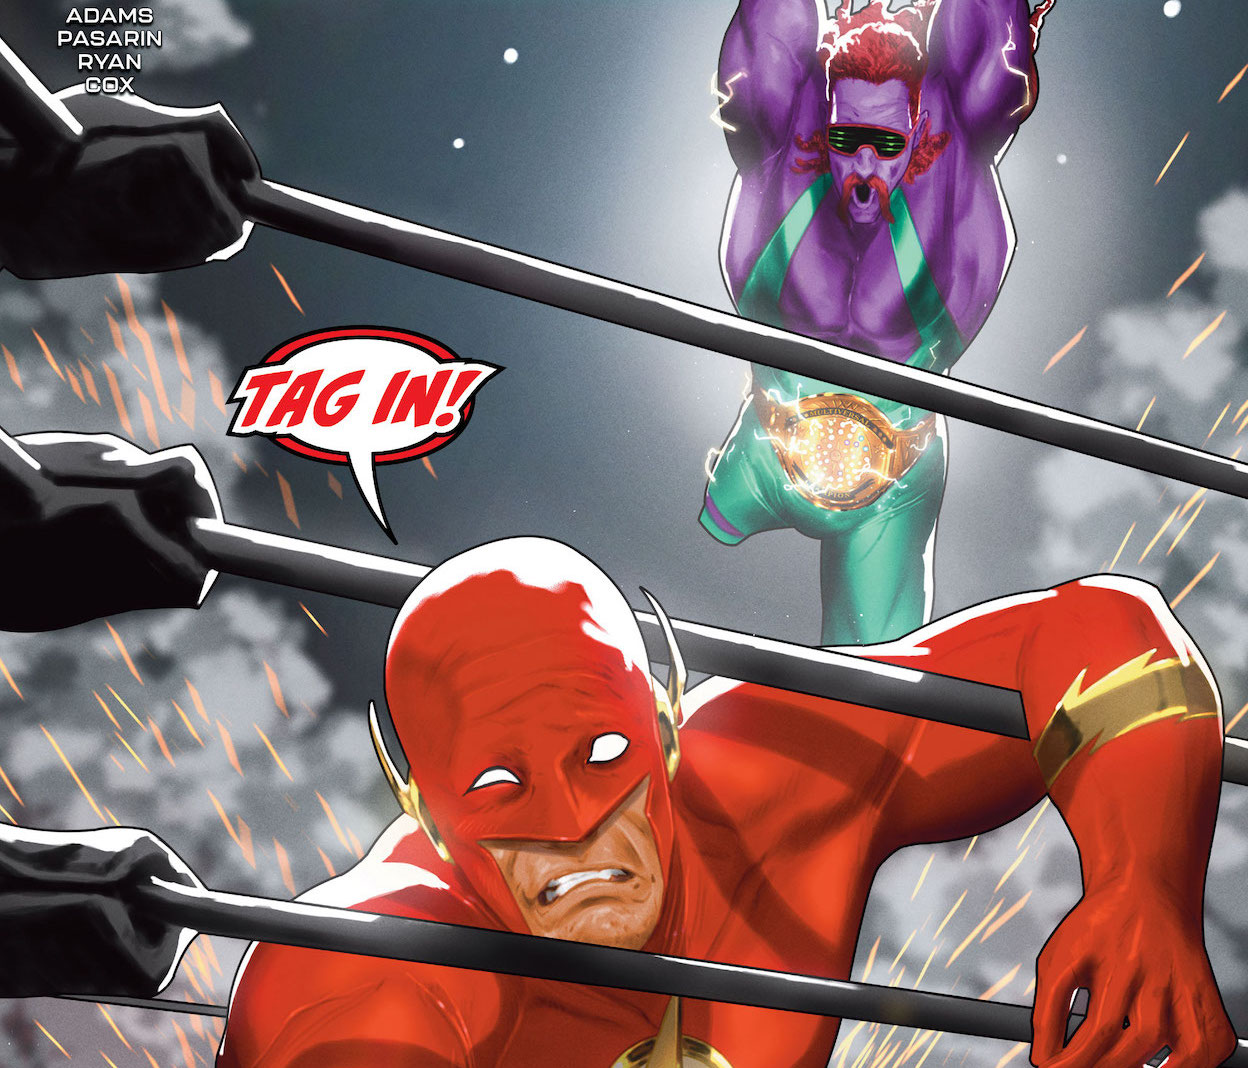 'The Flash' #787 will delight fans of wrestling and optimistic storytelling